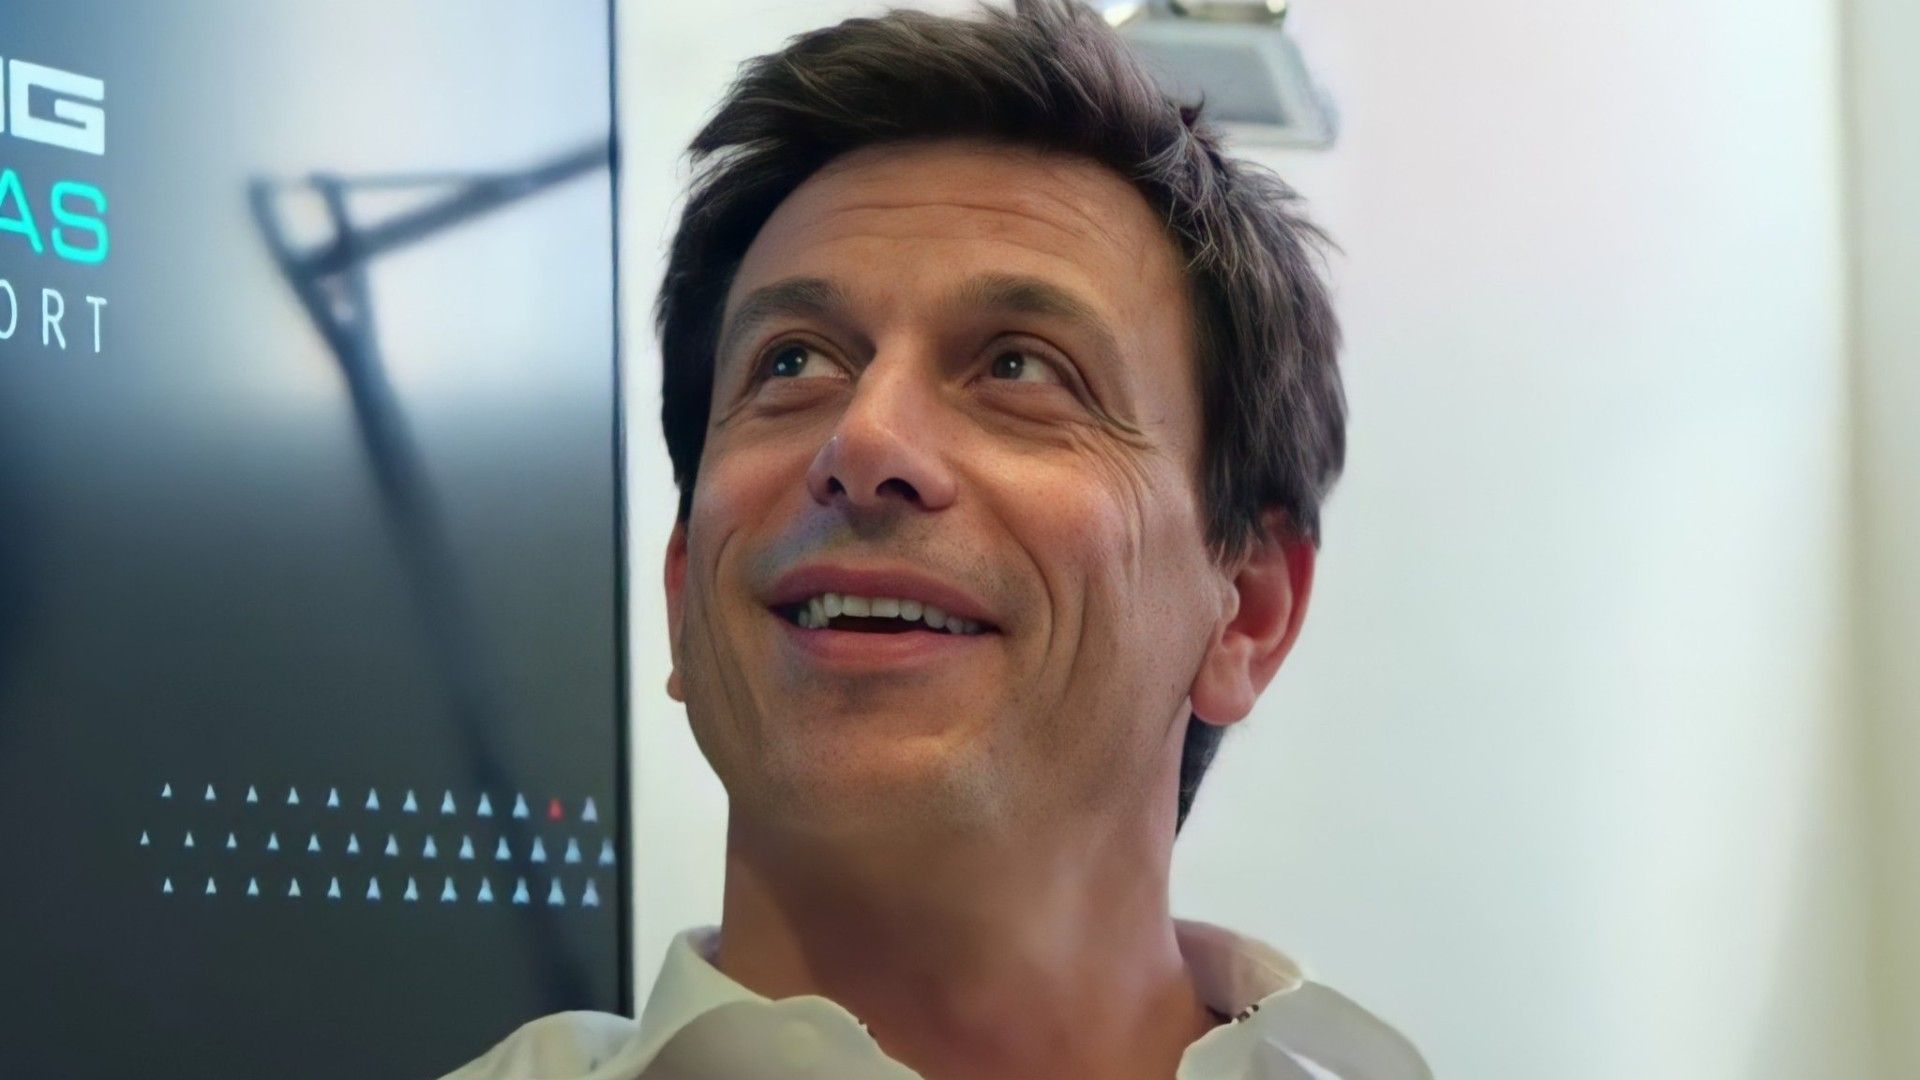 Mercedes F1 team chief Toto Wolff. (Image: Twitter)